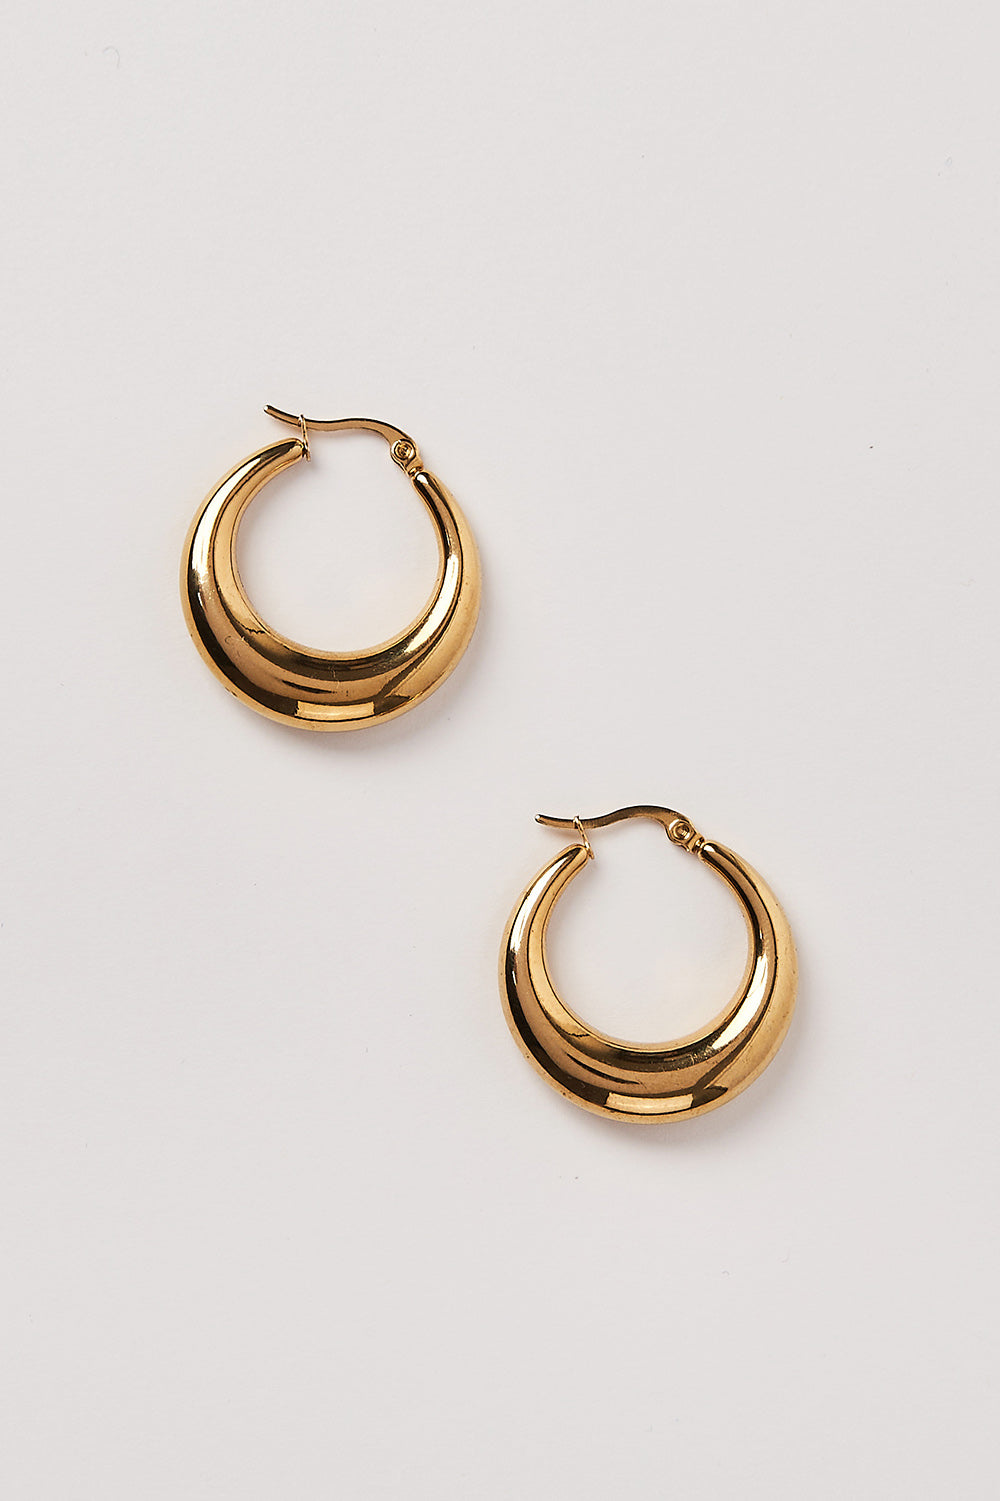 Buy Small Chunky Thick Gold Hoop Earrings Mini Gold Huggie Hoops for Women  Girls at Amazon.in